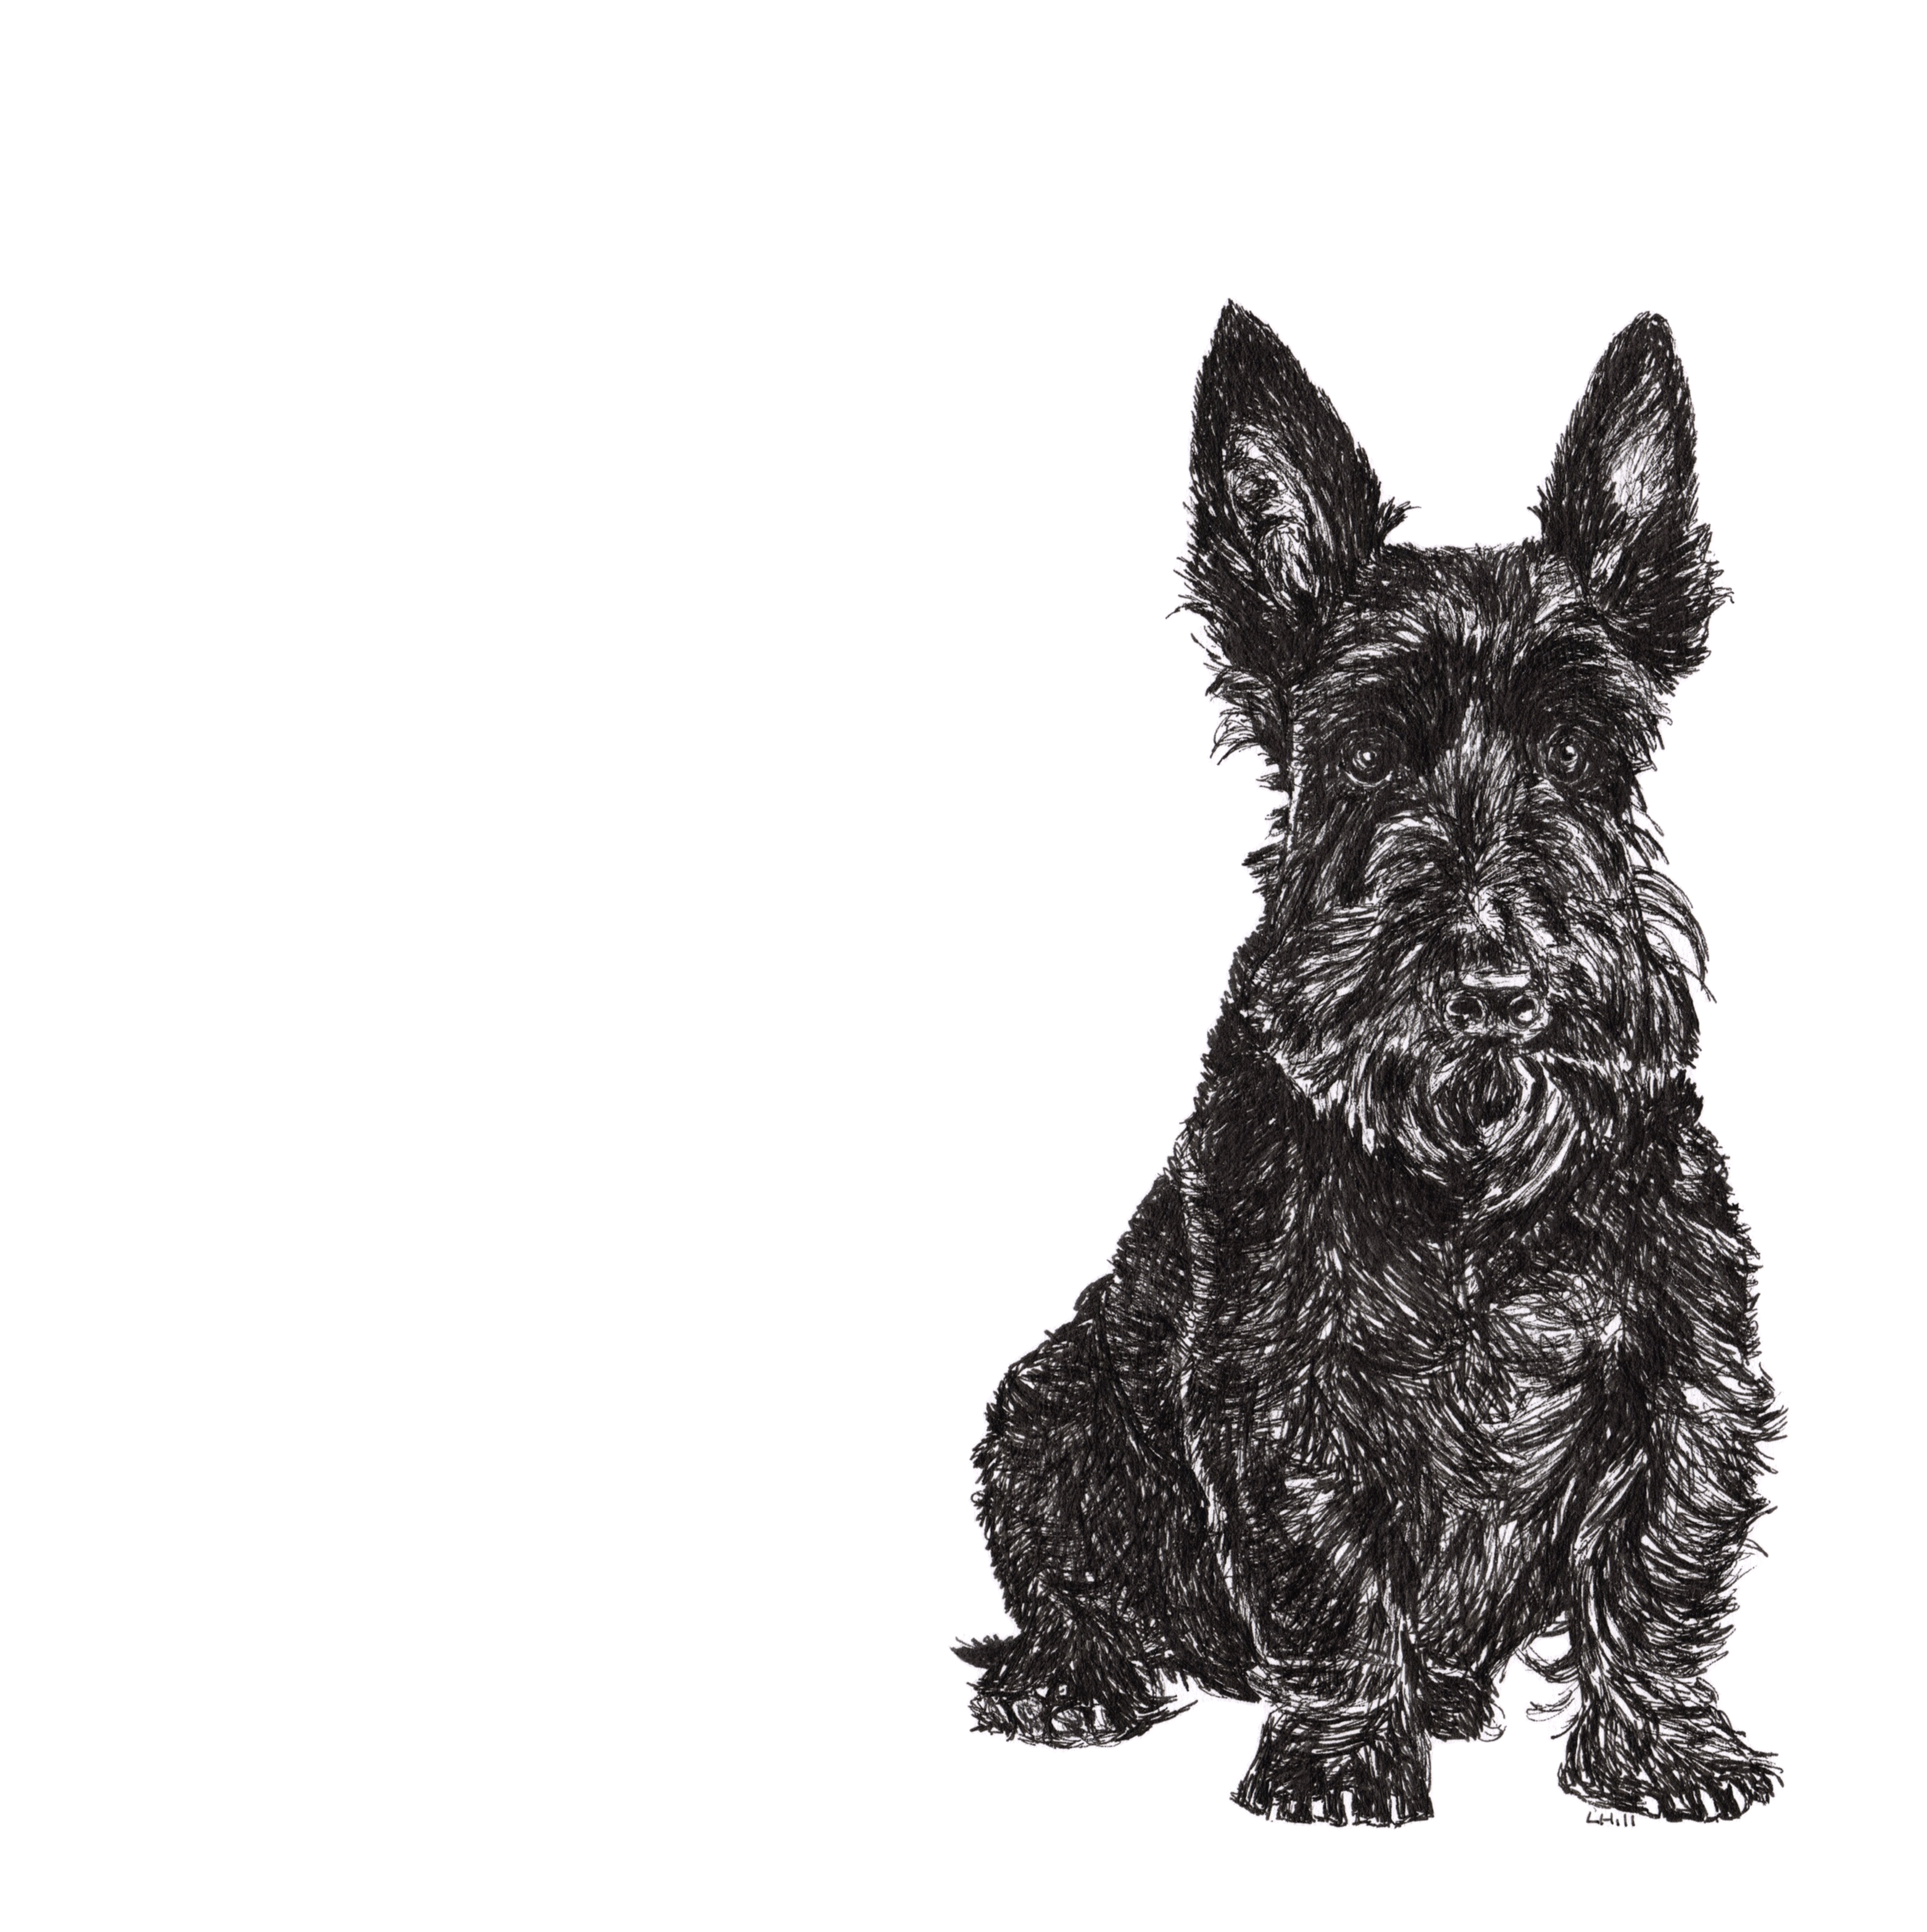 Scottish Terrier pen and ink illustration by Louisa Hil